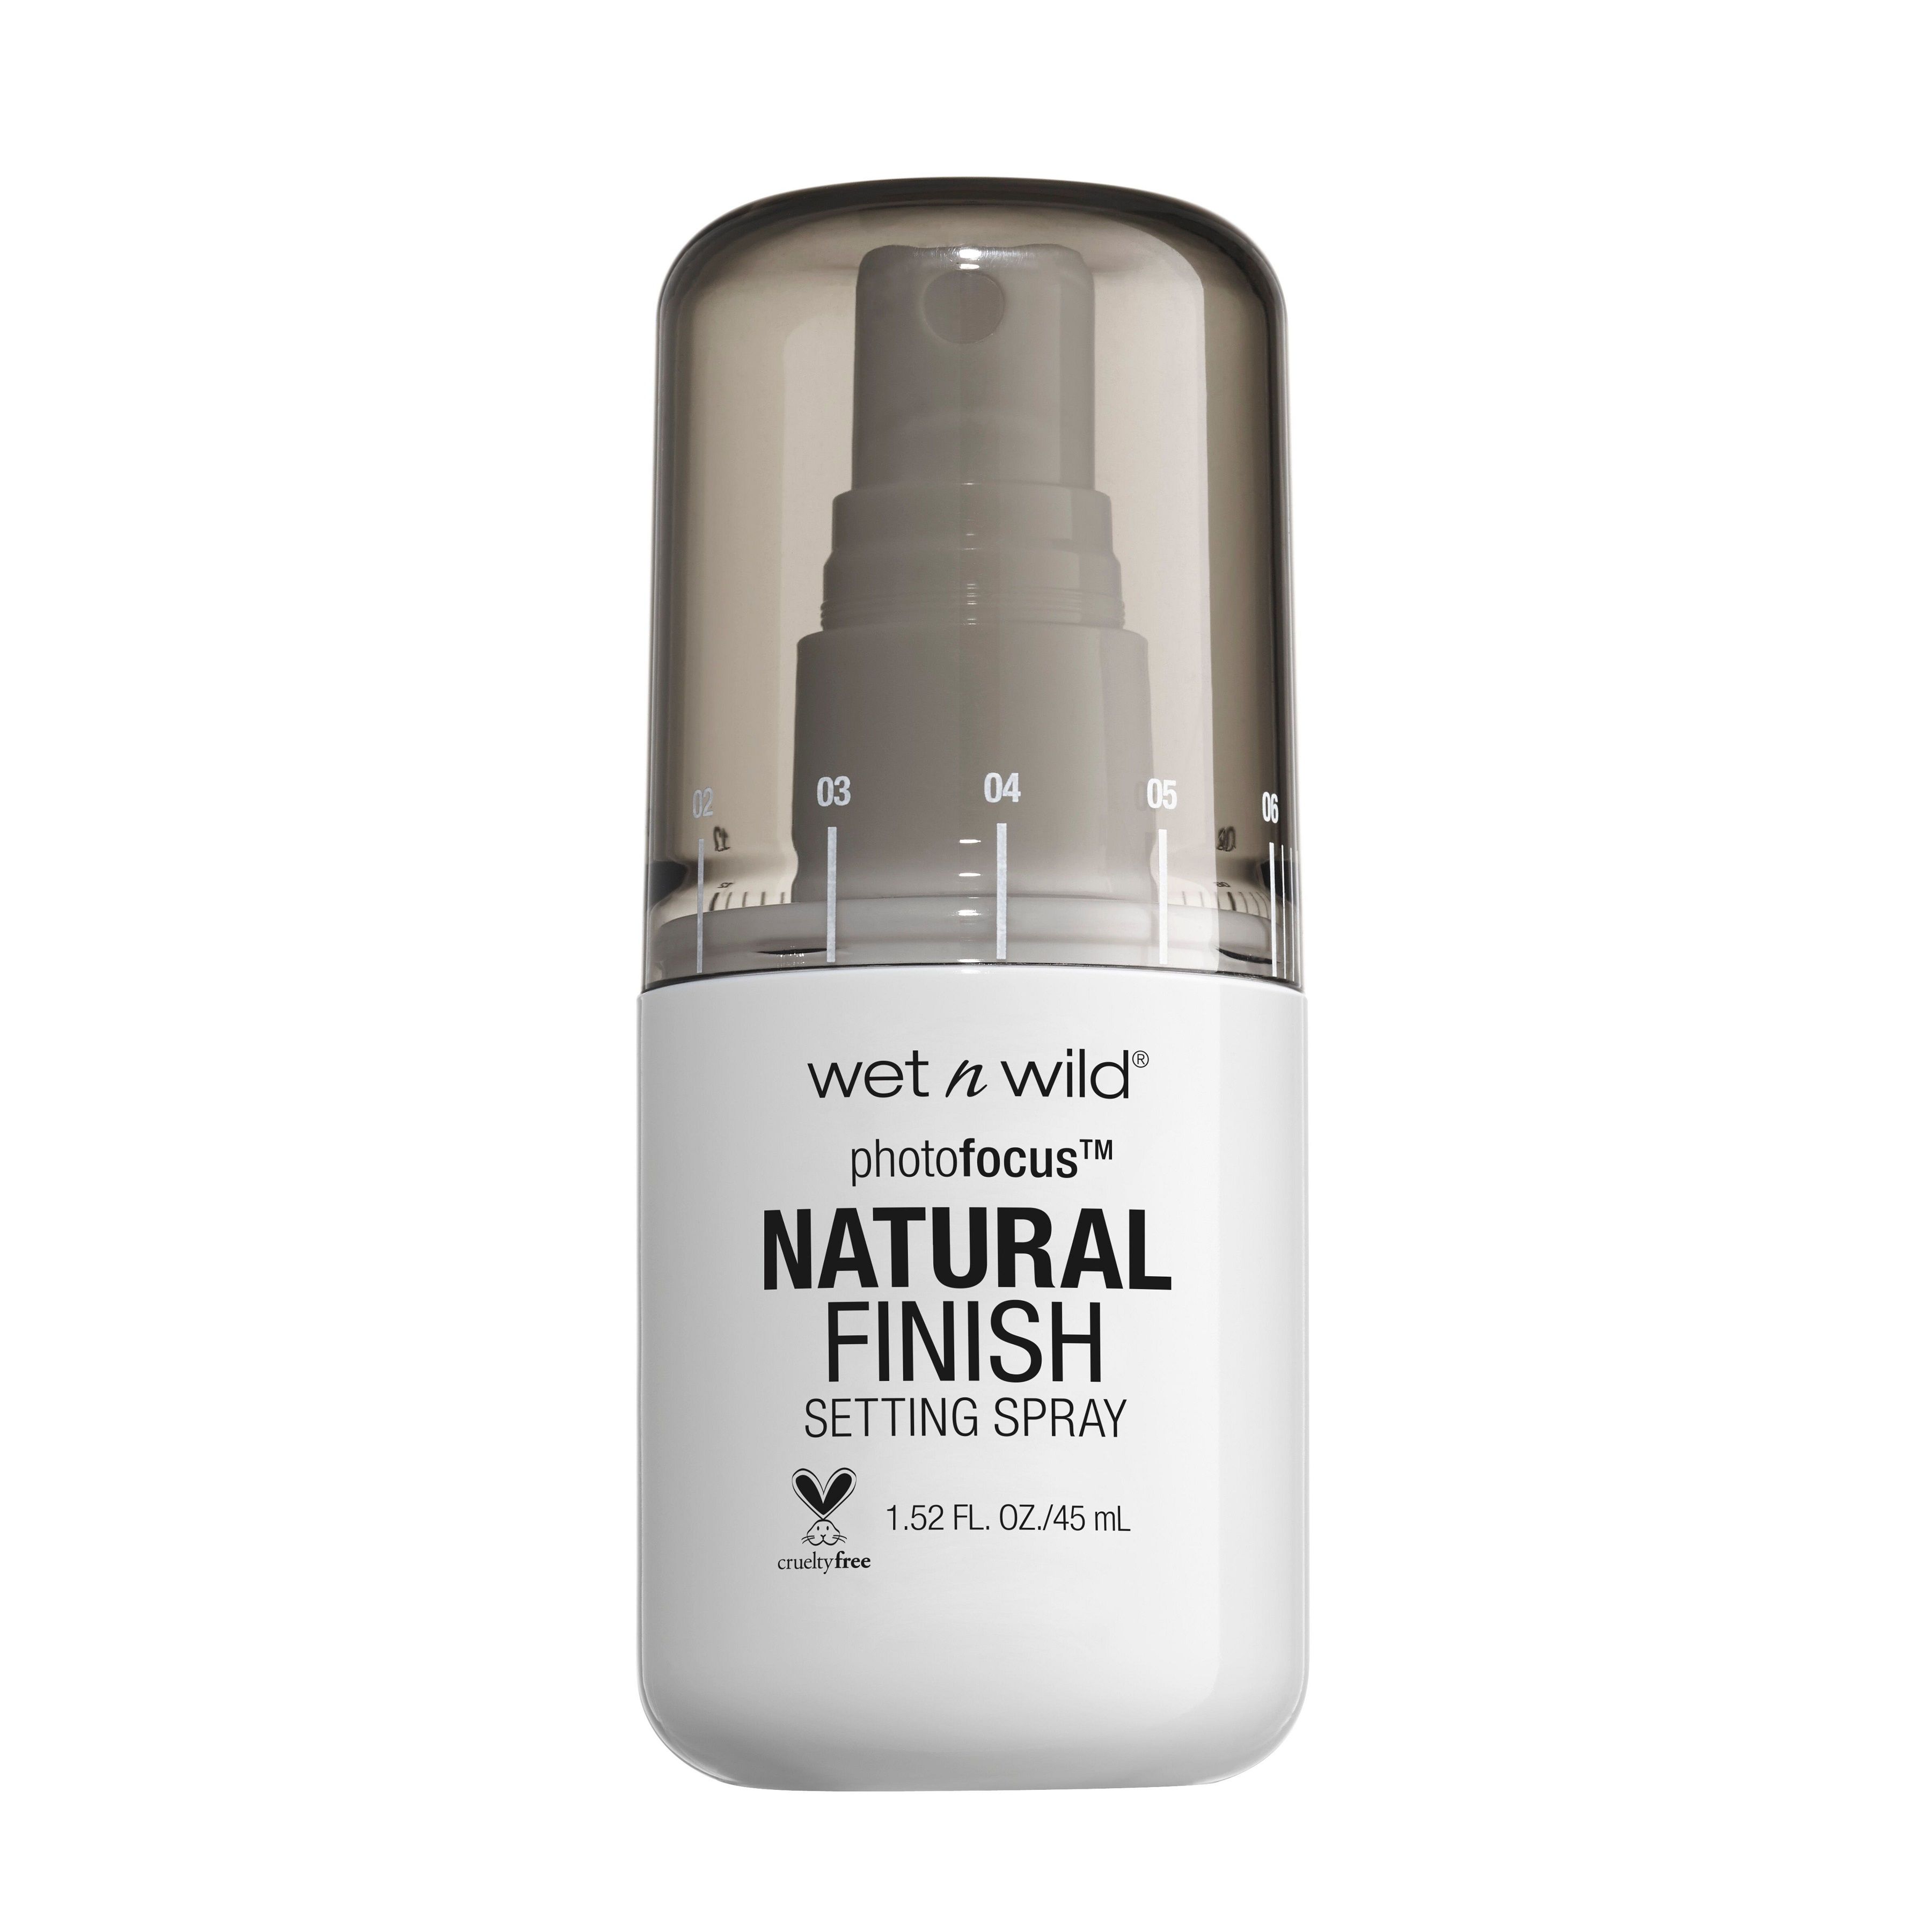 Wet n Wild Photofocus Natural Finish Setting Spray - Seal The Deal